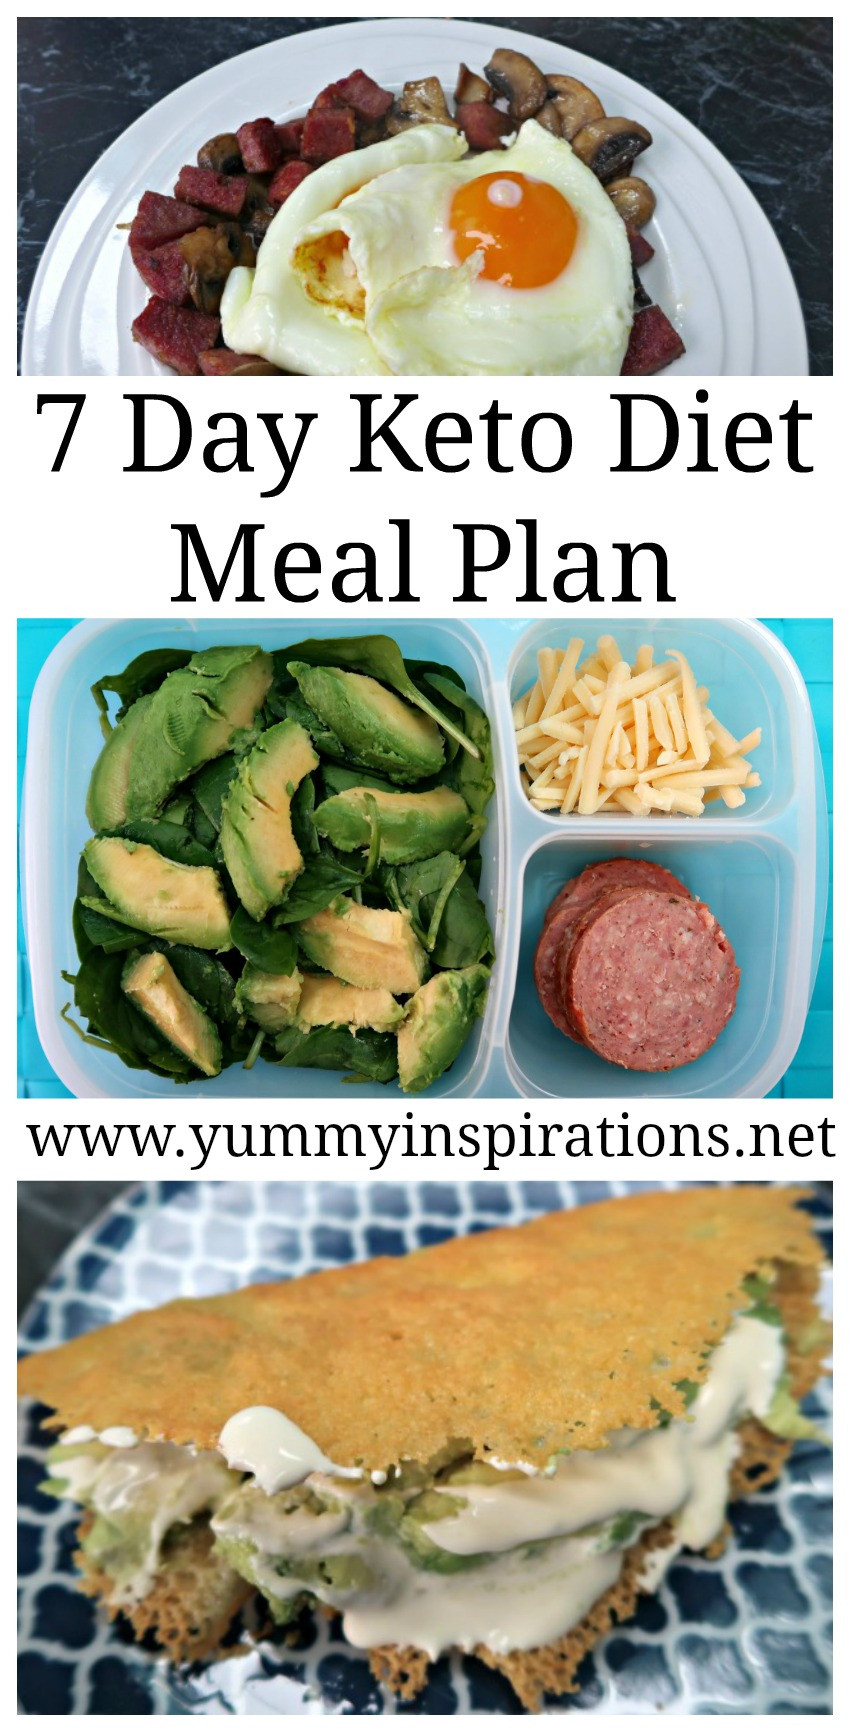 Keto Diet Meal Planner
 7 Day Keto Diet Meal Plan For Weight Loss Ketogenic Foods